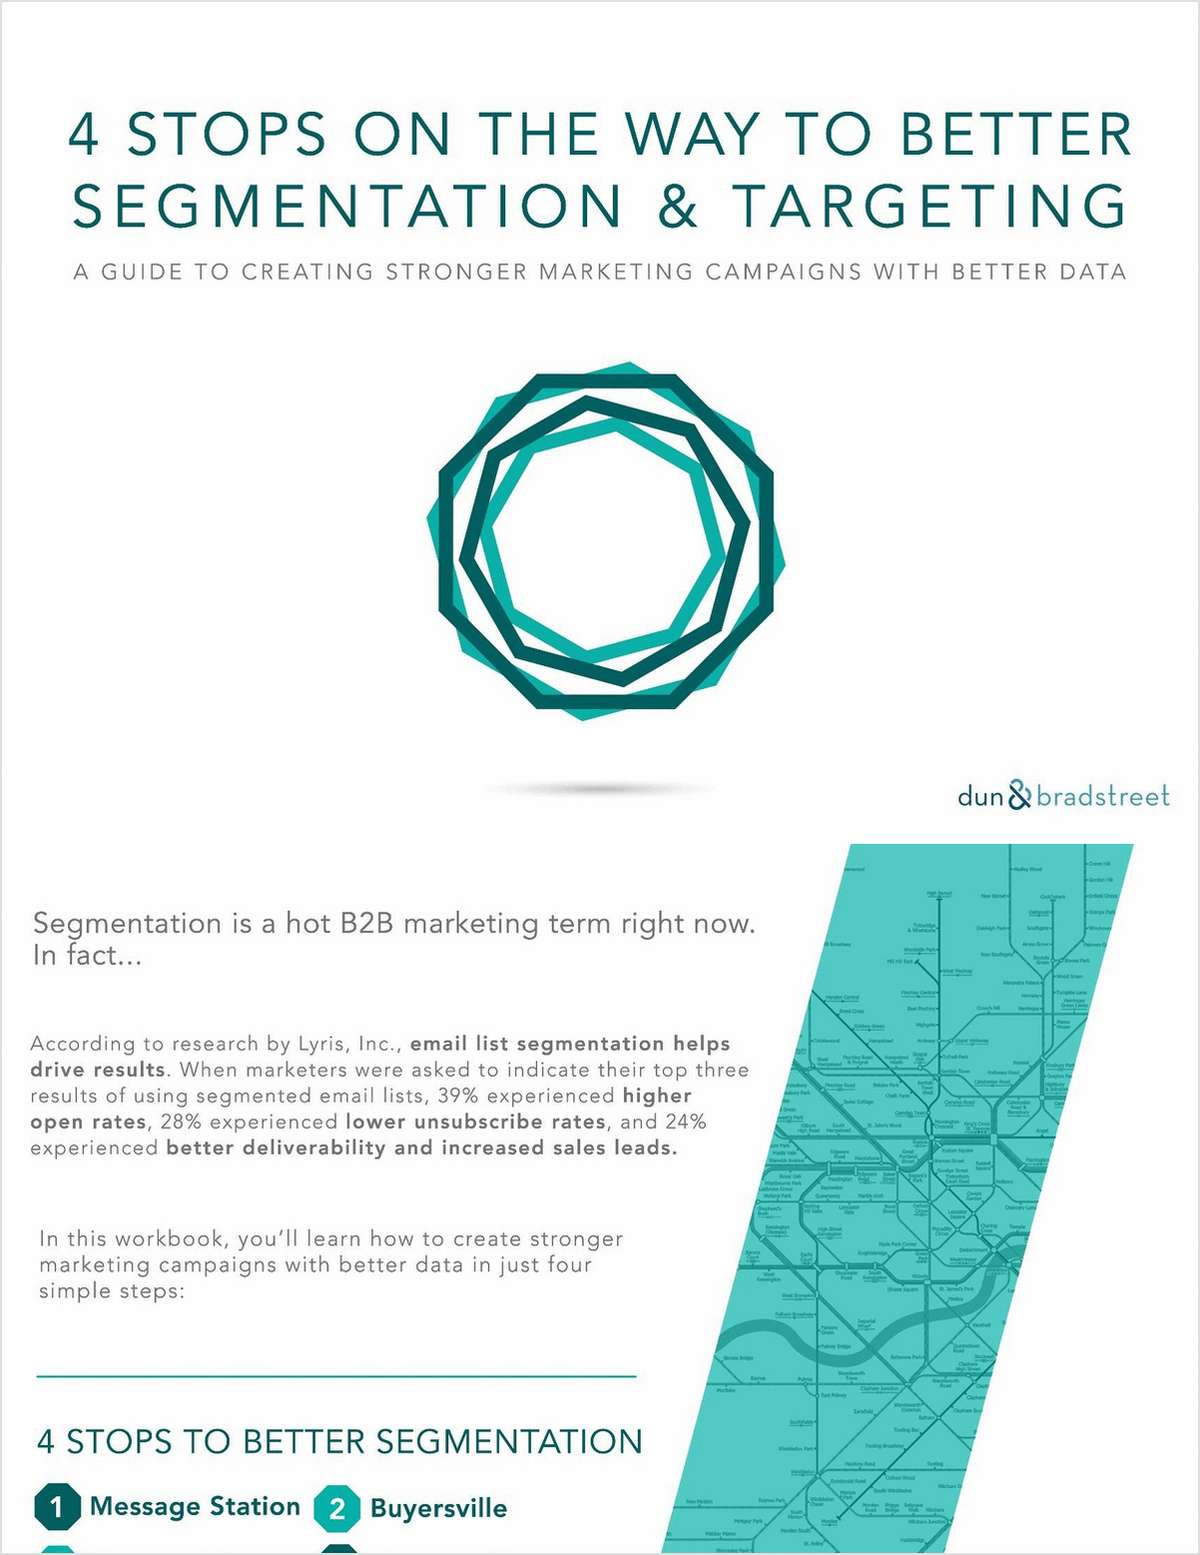 4 'Stops' on the Way to Better Segmentation & Targeting